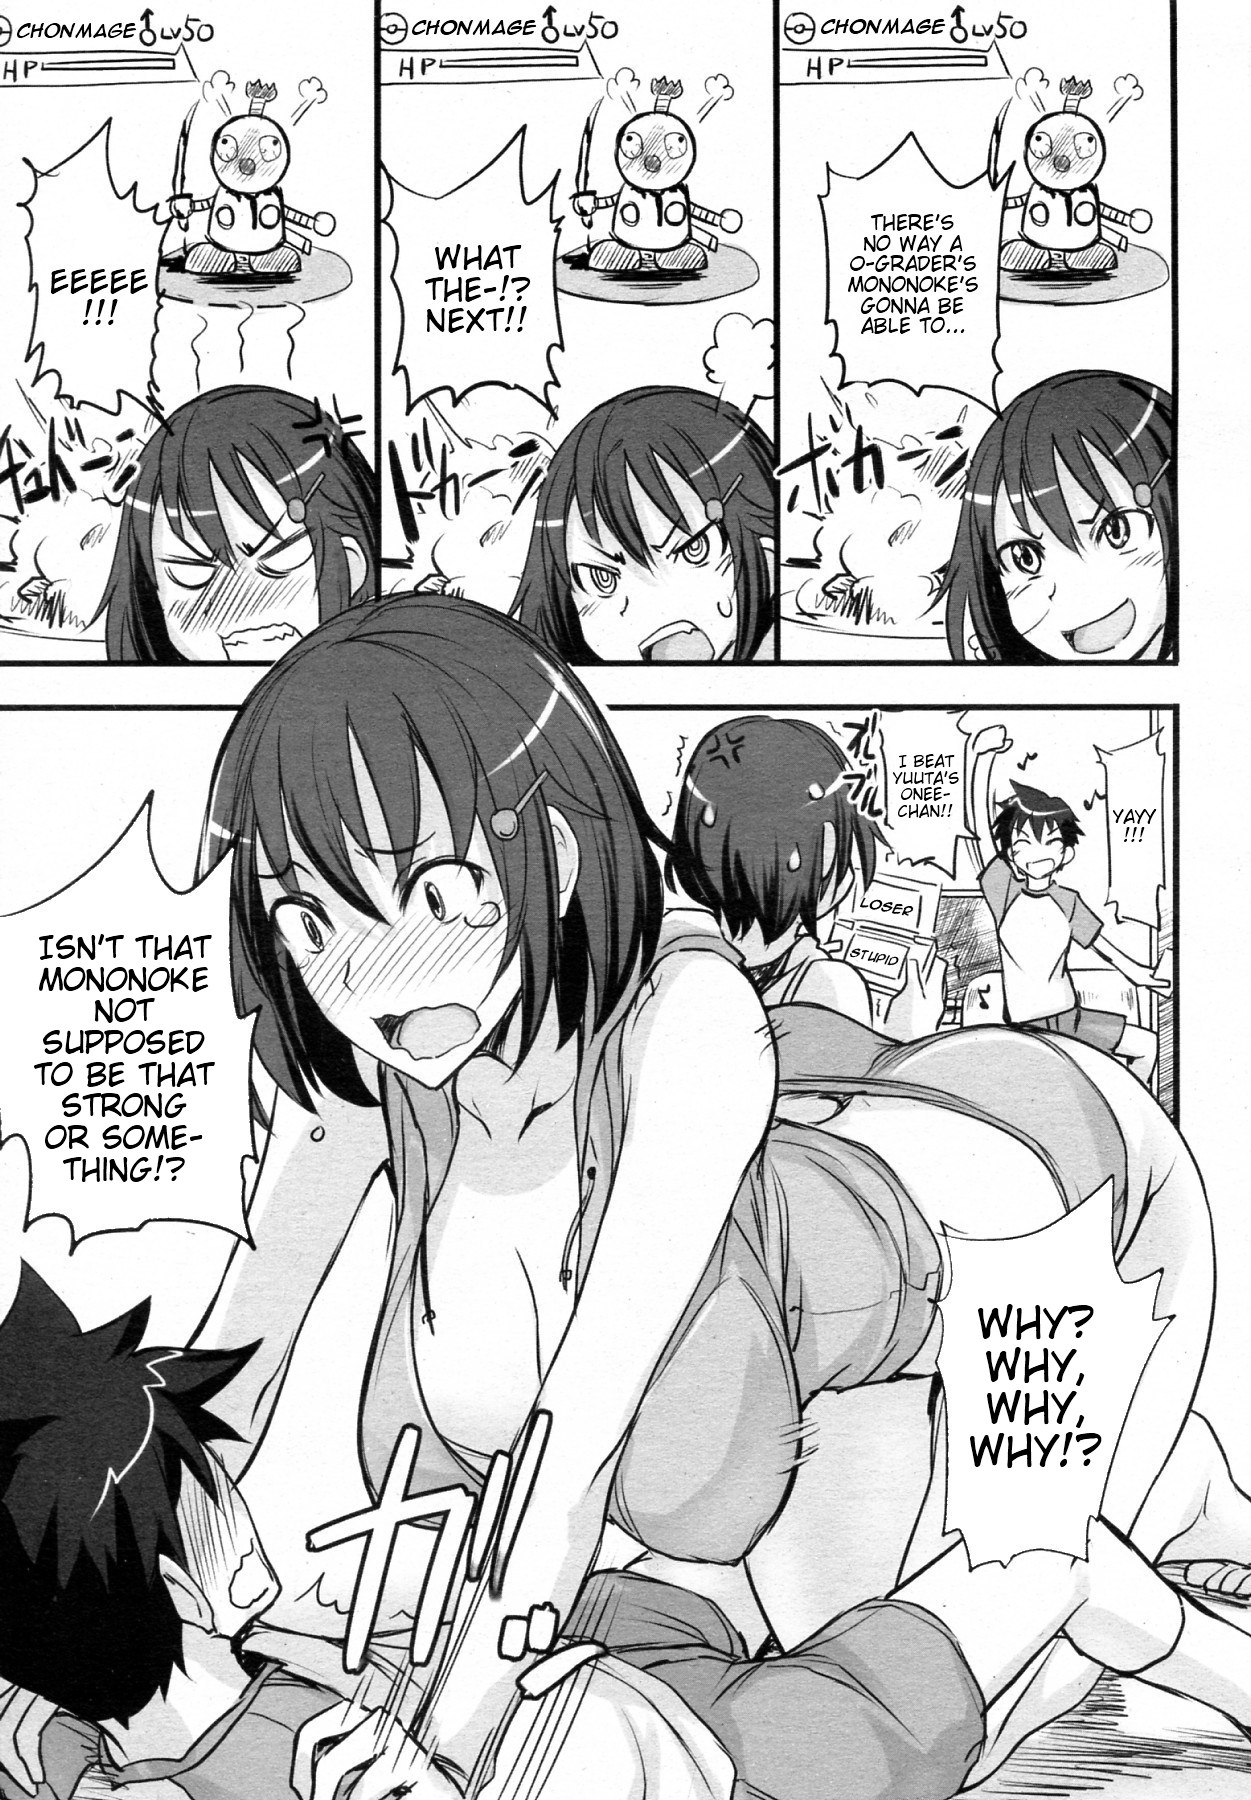 [isao] Game Shiyouze! | Let's Play a Game! (COMIC Megamilk 2011-03 Vol. 09) [English] =TTT + TV= page 3 full